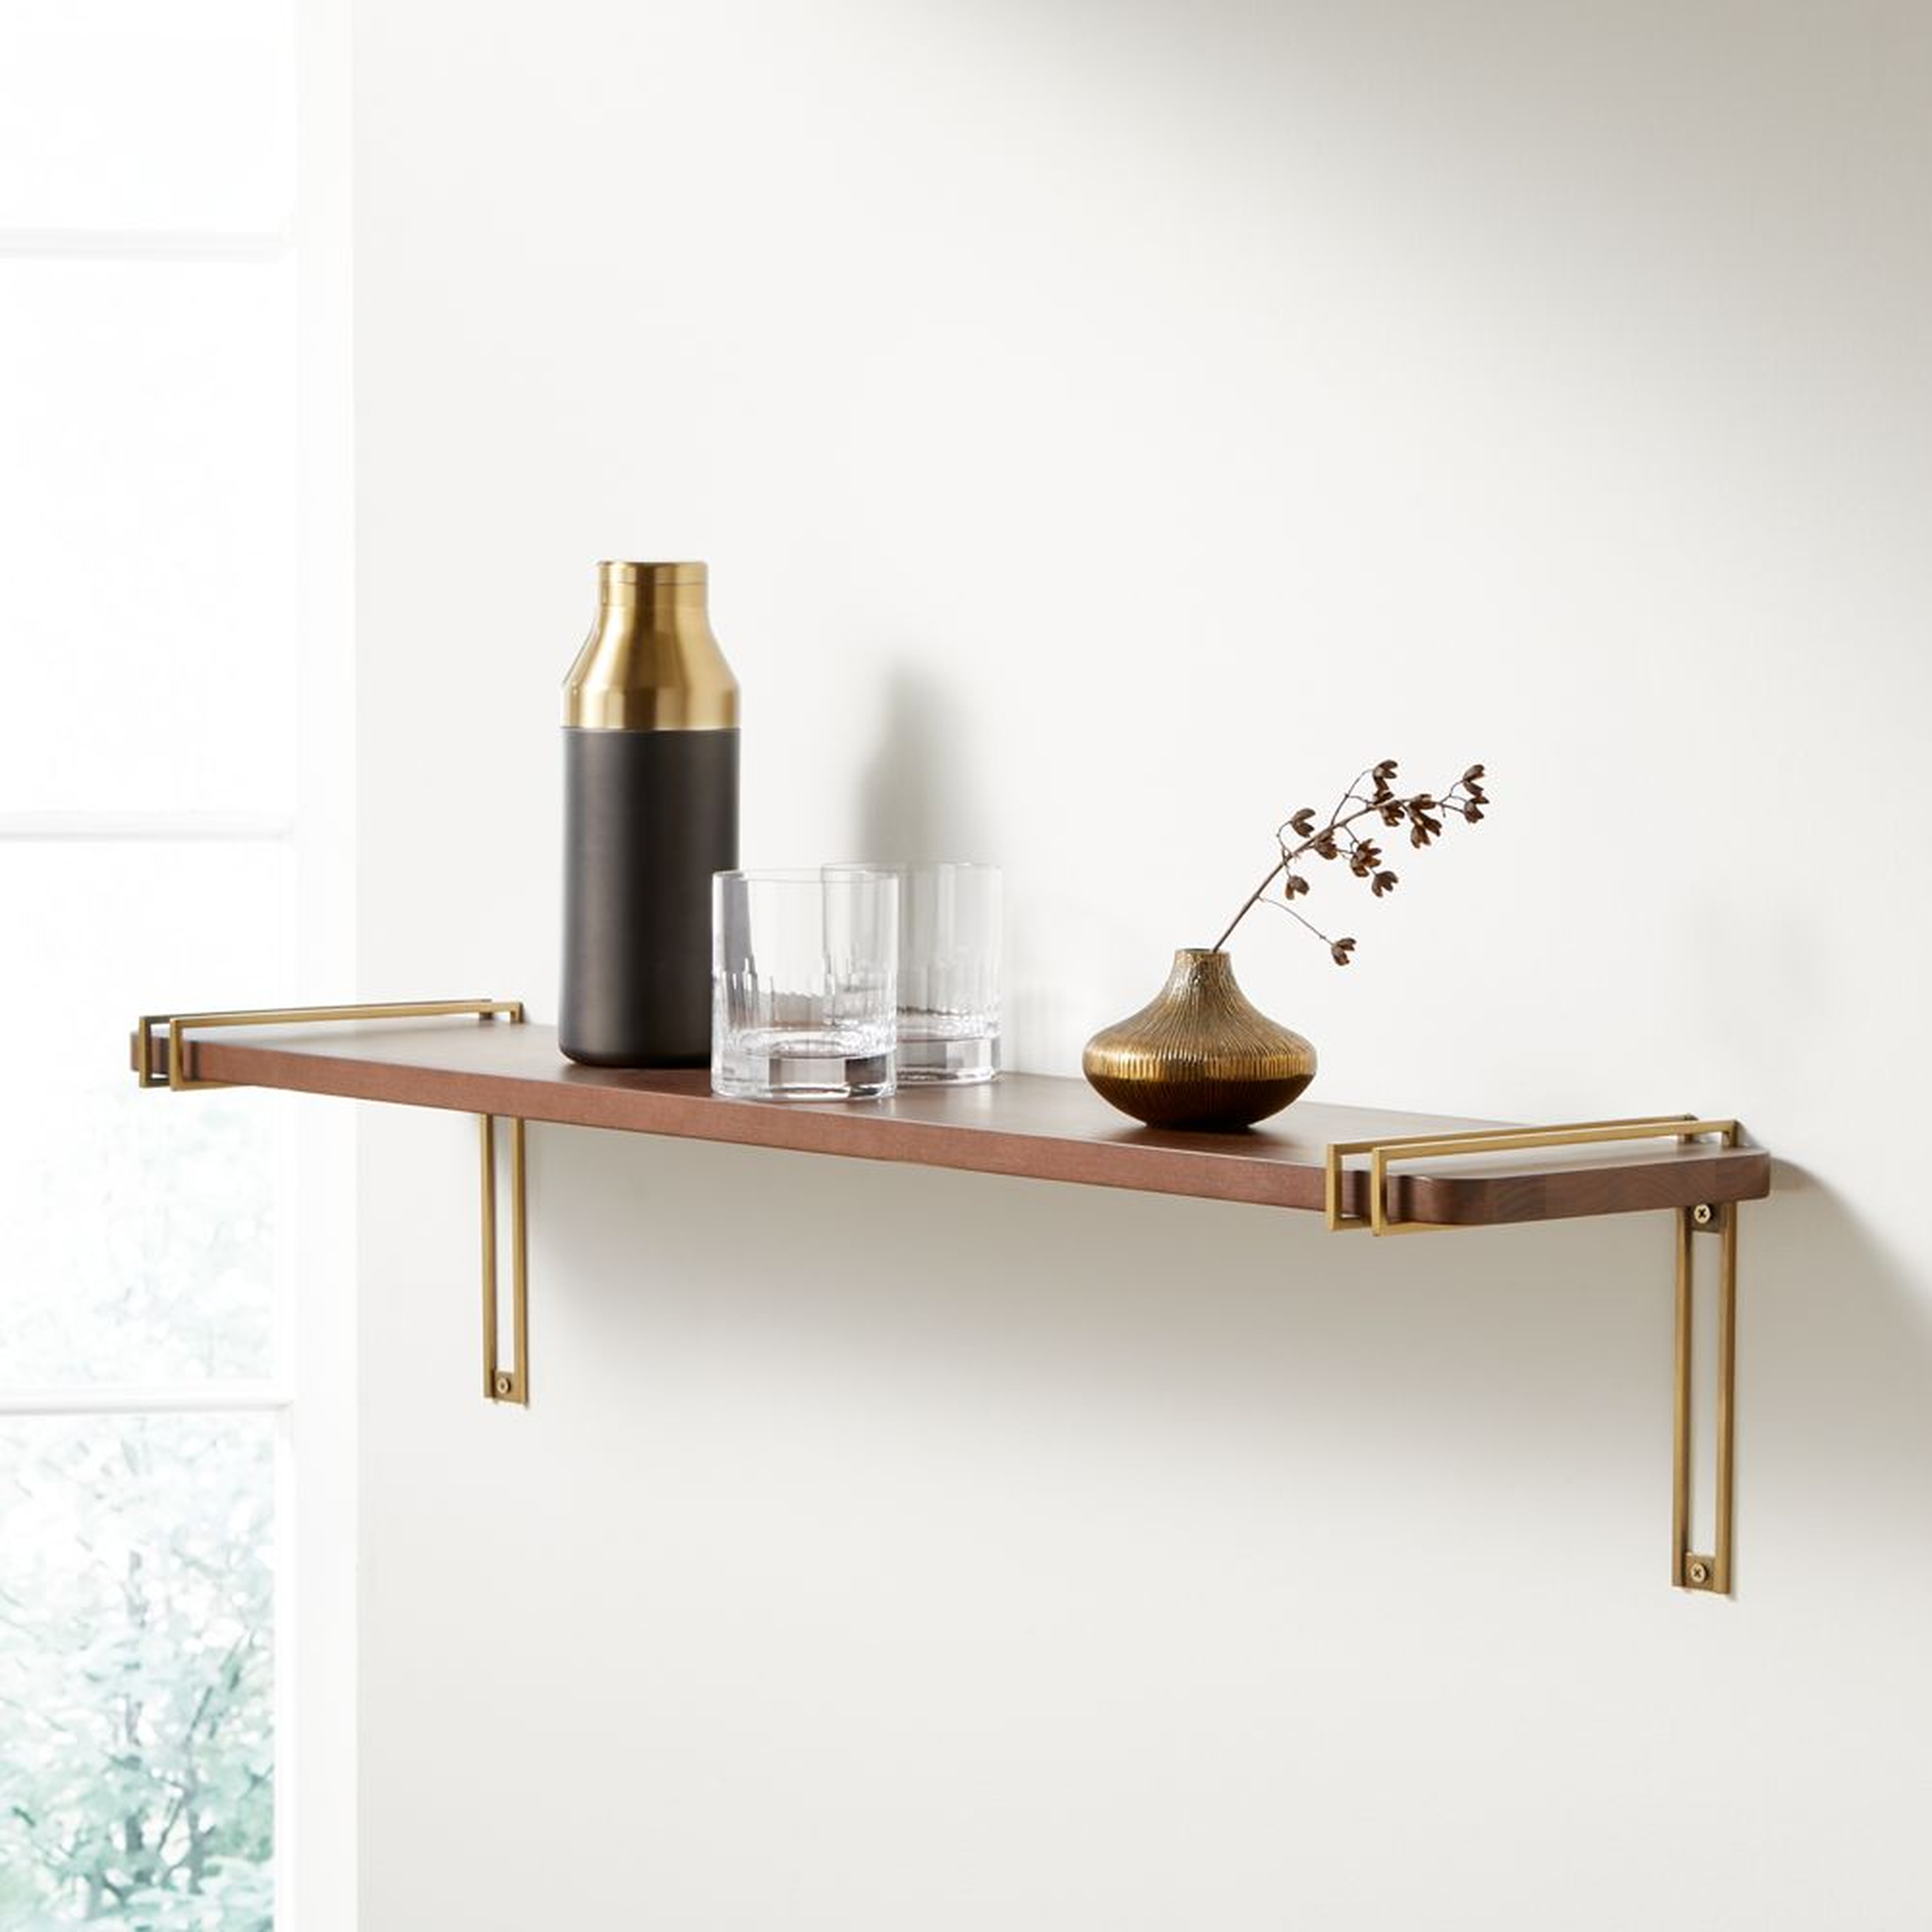 Riggs 36" Walnut Shelf with Brass Duo Band Brackets - Crate and Barrel